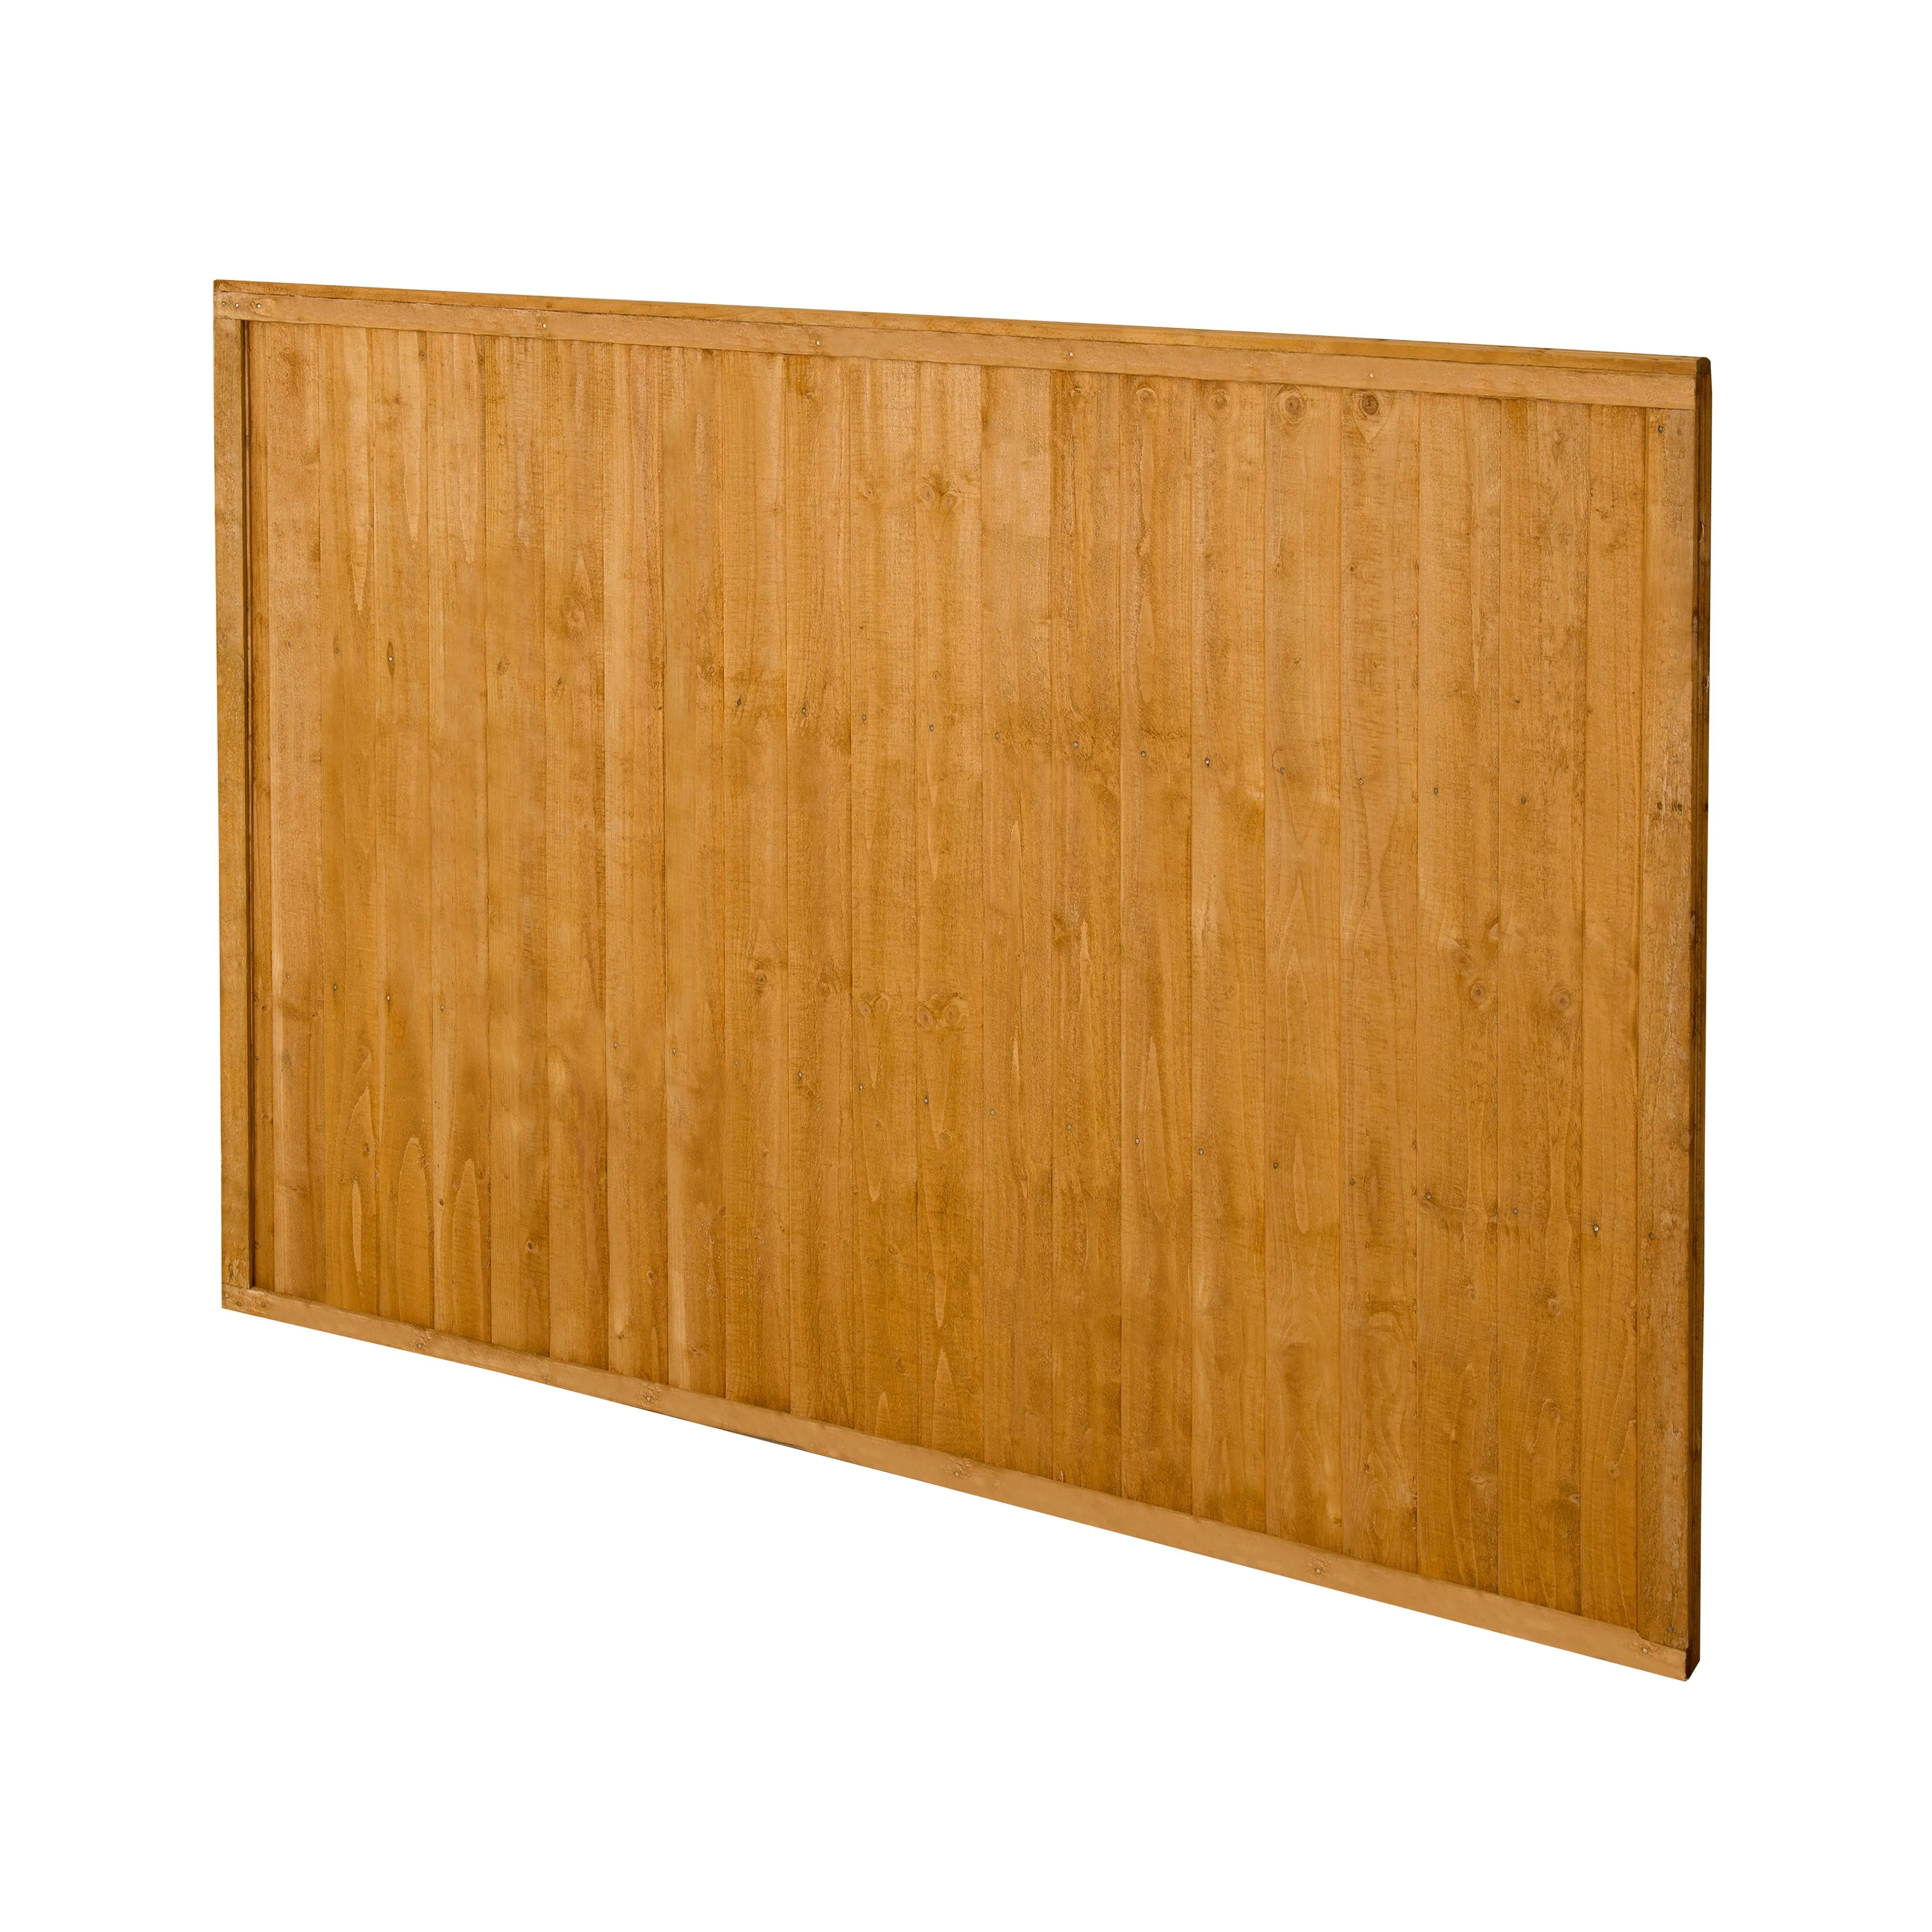 Forest Garden Closeboard Dip treated Fence panel (W)1.83m (H)1.22m, Pack of 3